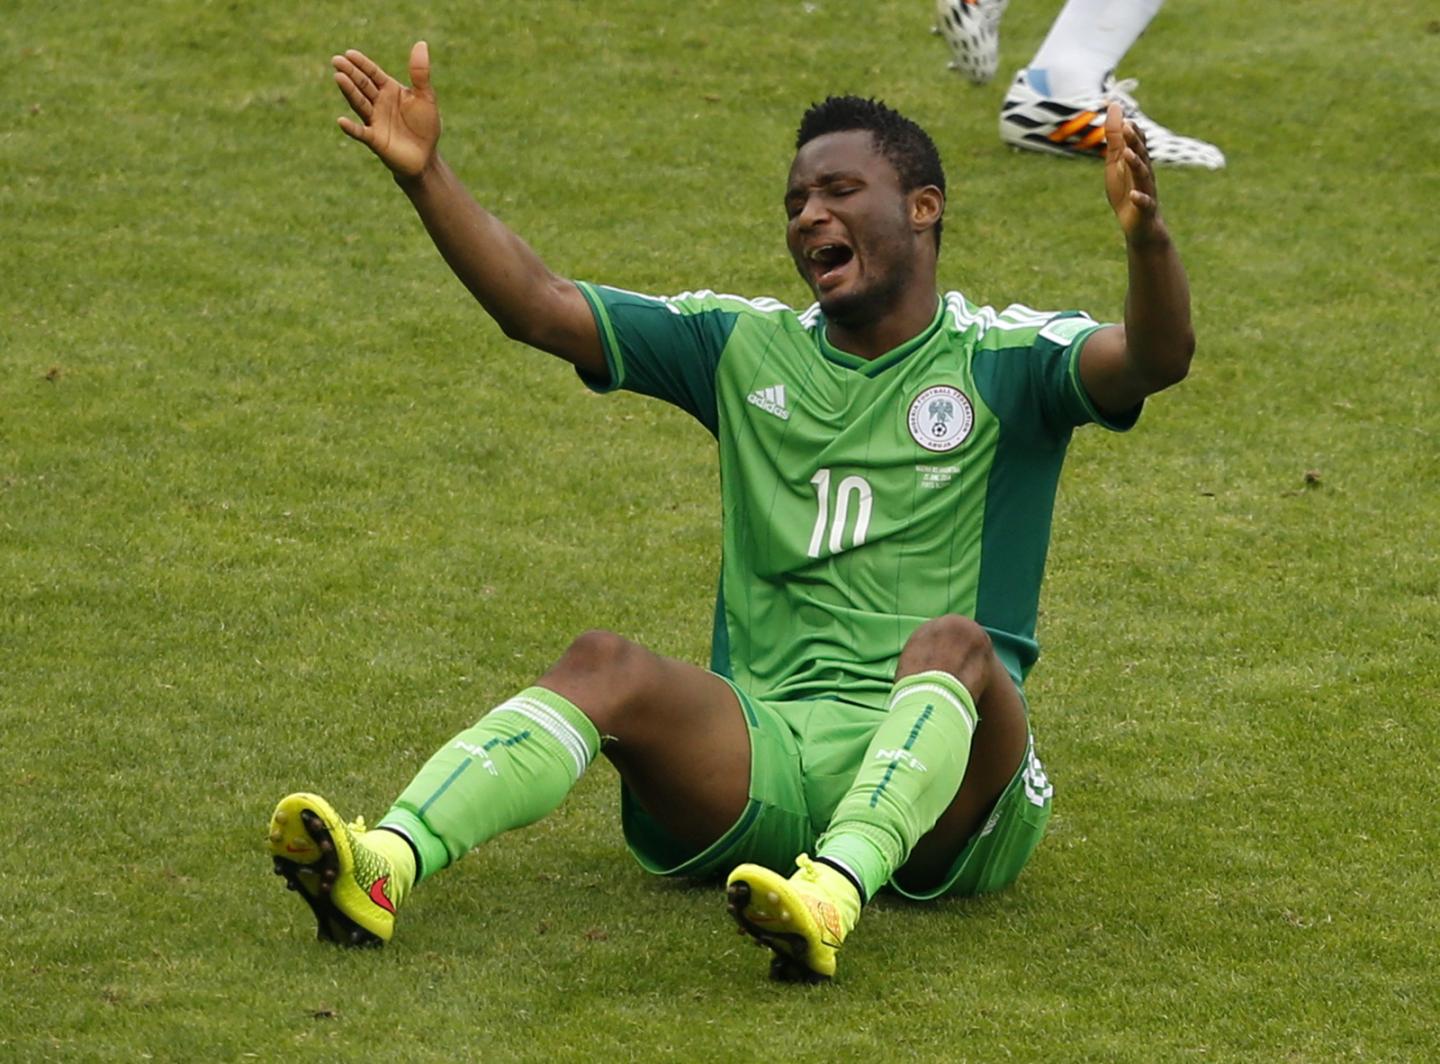  Nigeria's John Obi Mikel calls for a foul during a match at the World Cup in Porto Alegre, Brazil, June 25, 2014. Mikel is the captain of Nigeria's Olympic football team, which is due to arrive in Brazil just hours before their first game on Thursday.  Marko Djurica/Reuters 